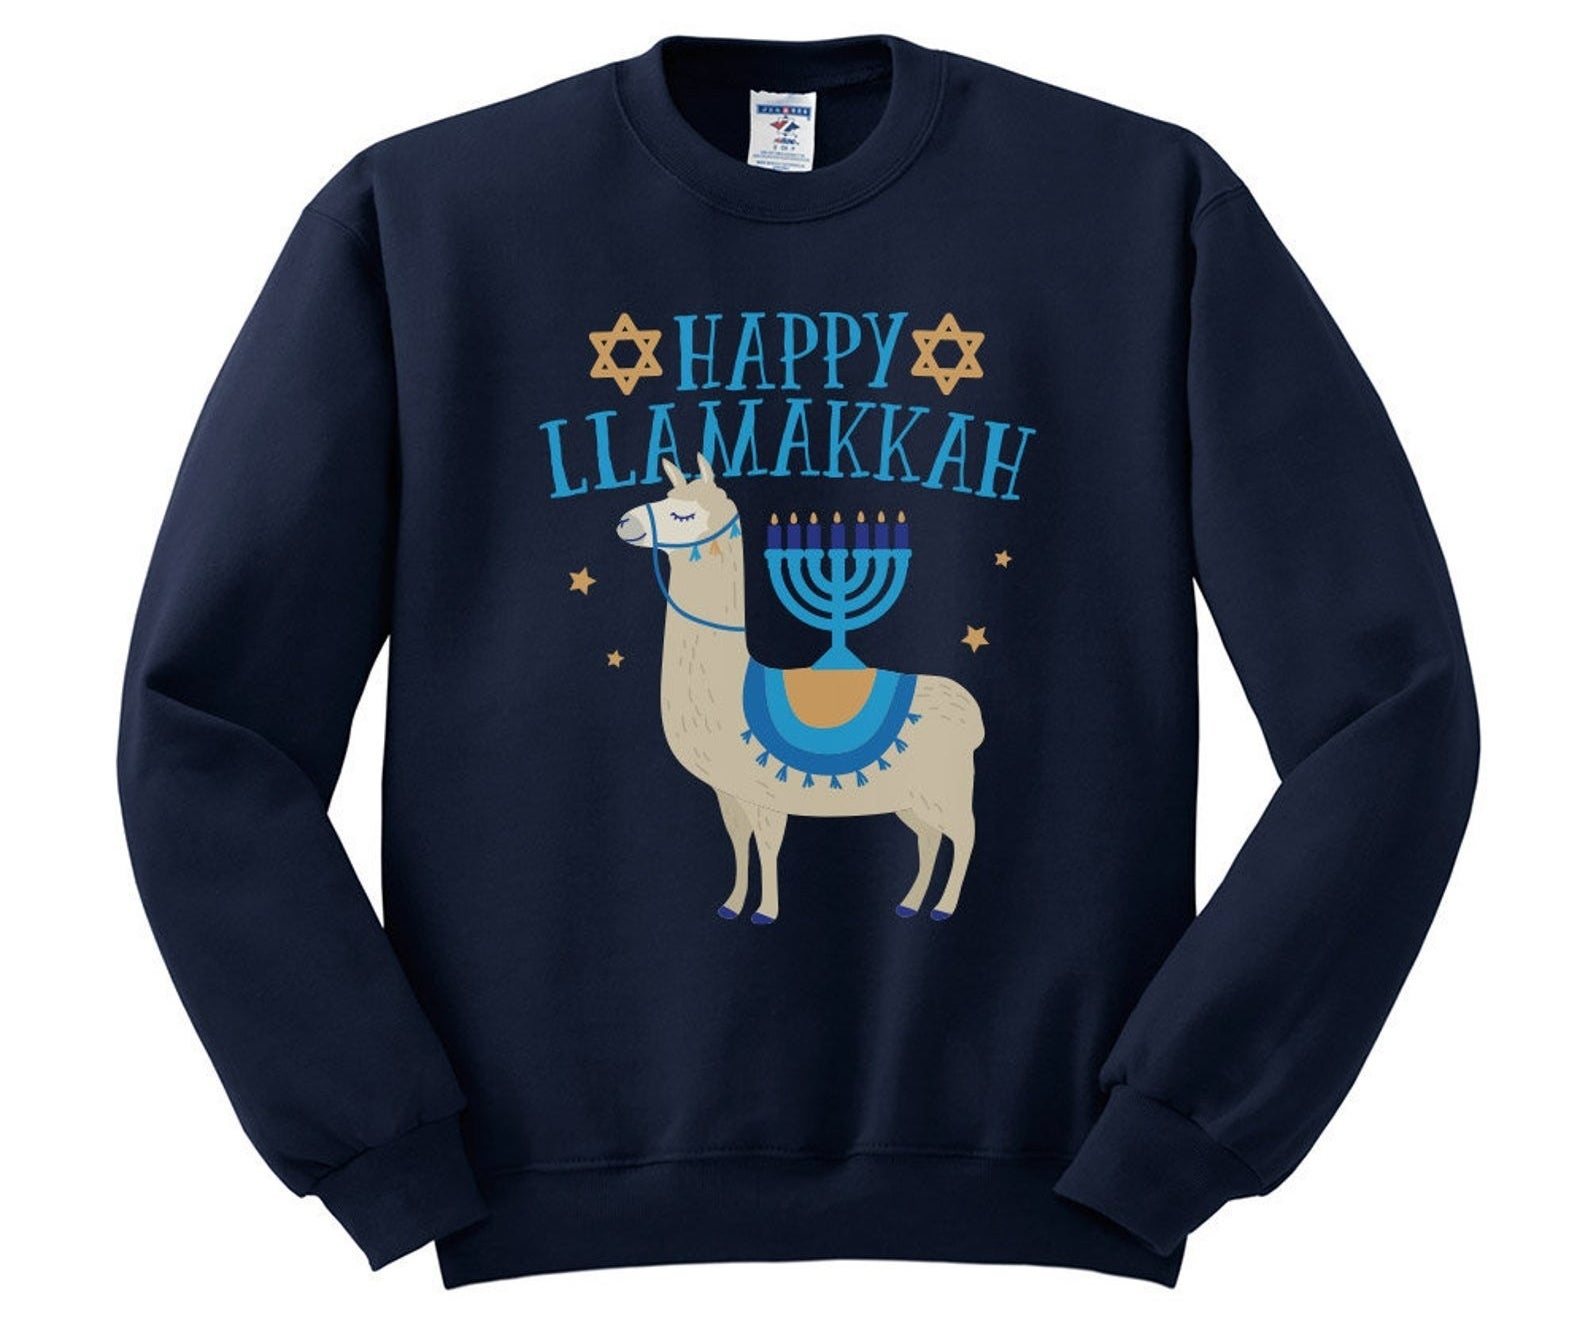 the blue pullover that reads &quot;happy llamakkah&quot; in blue text with an illustration of a llama with a menorah on its back